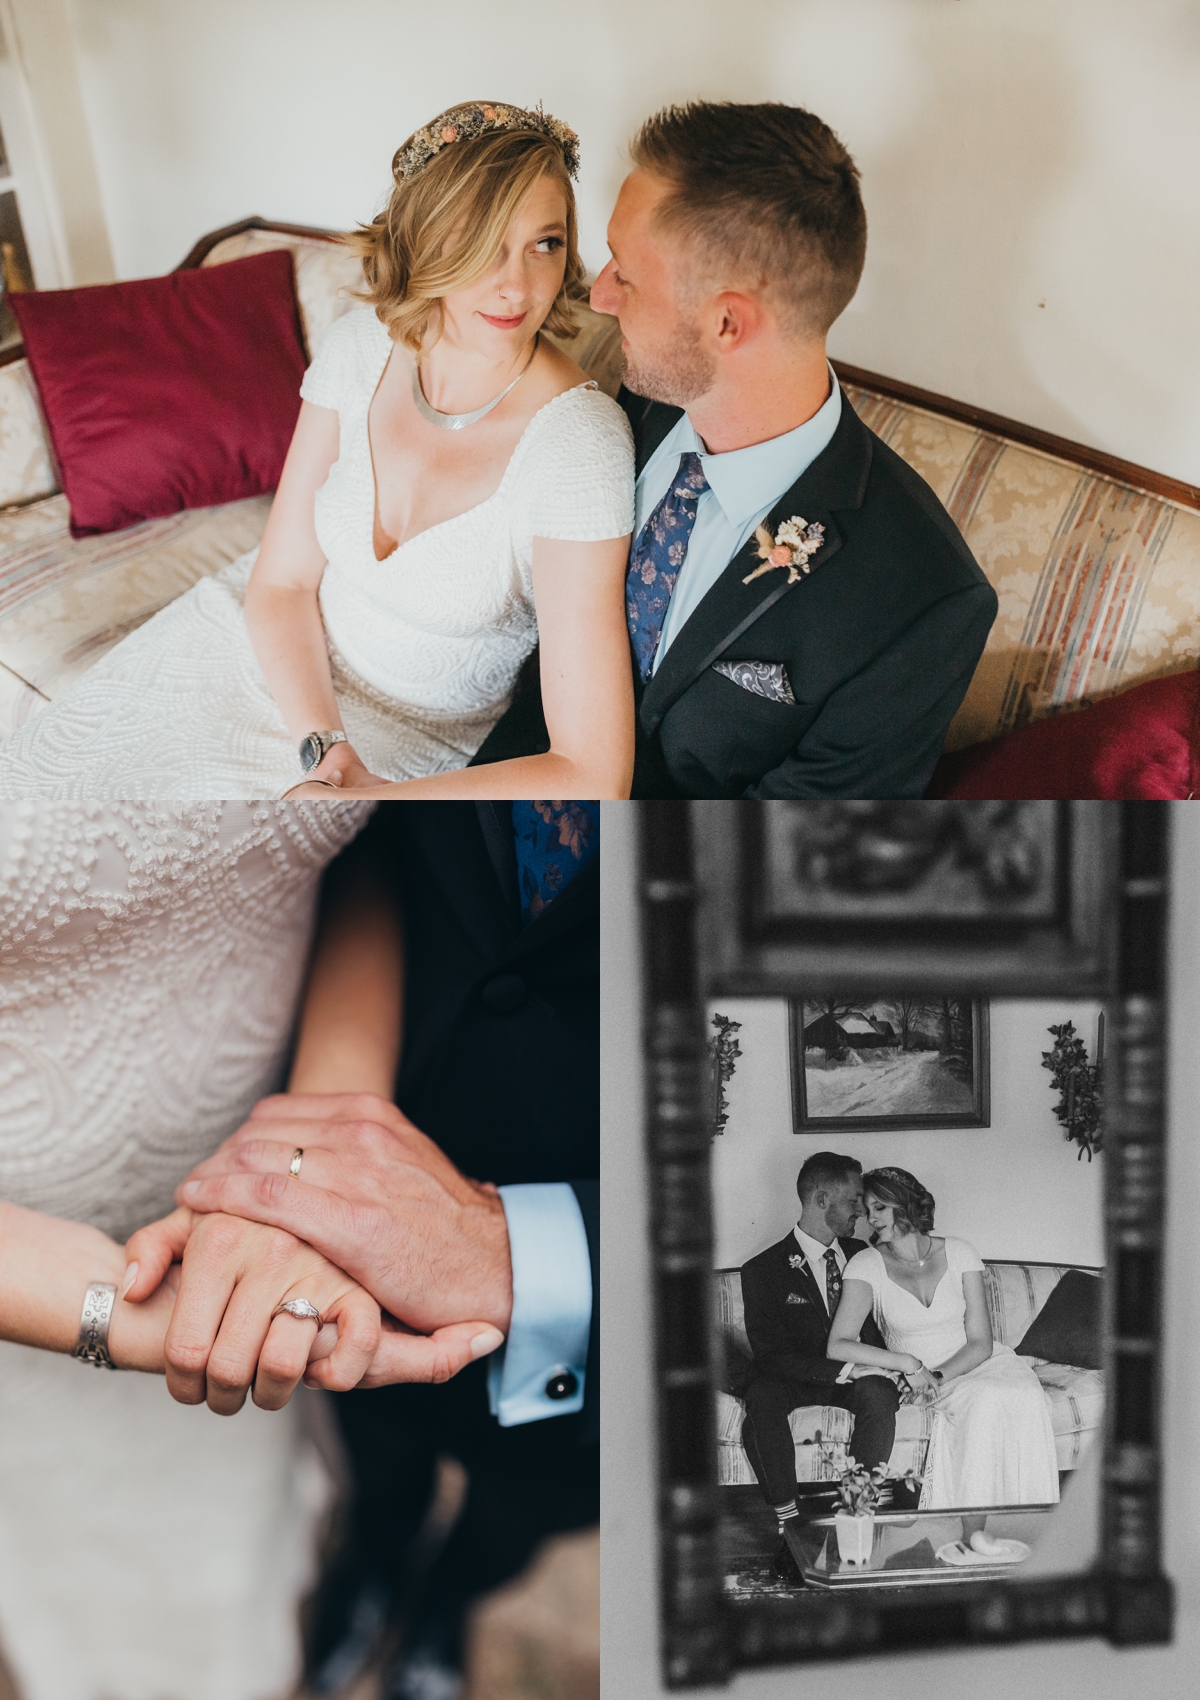 Bride and groom portraits in a private home in Sturbridge